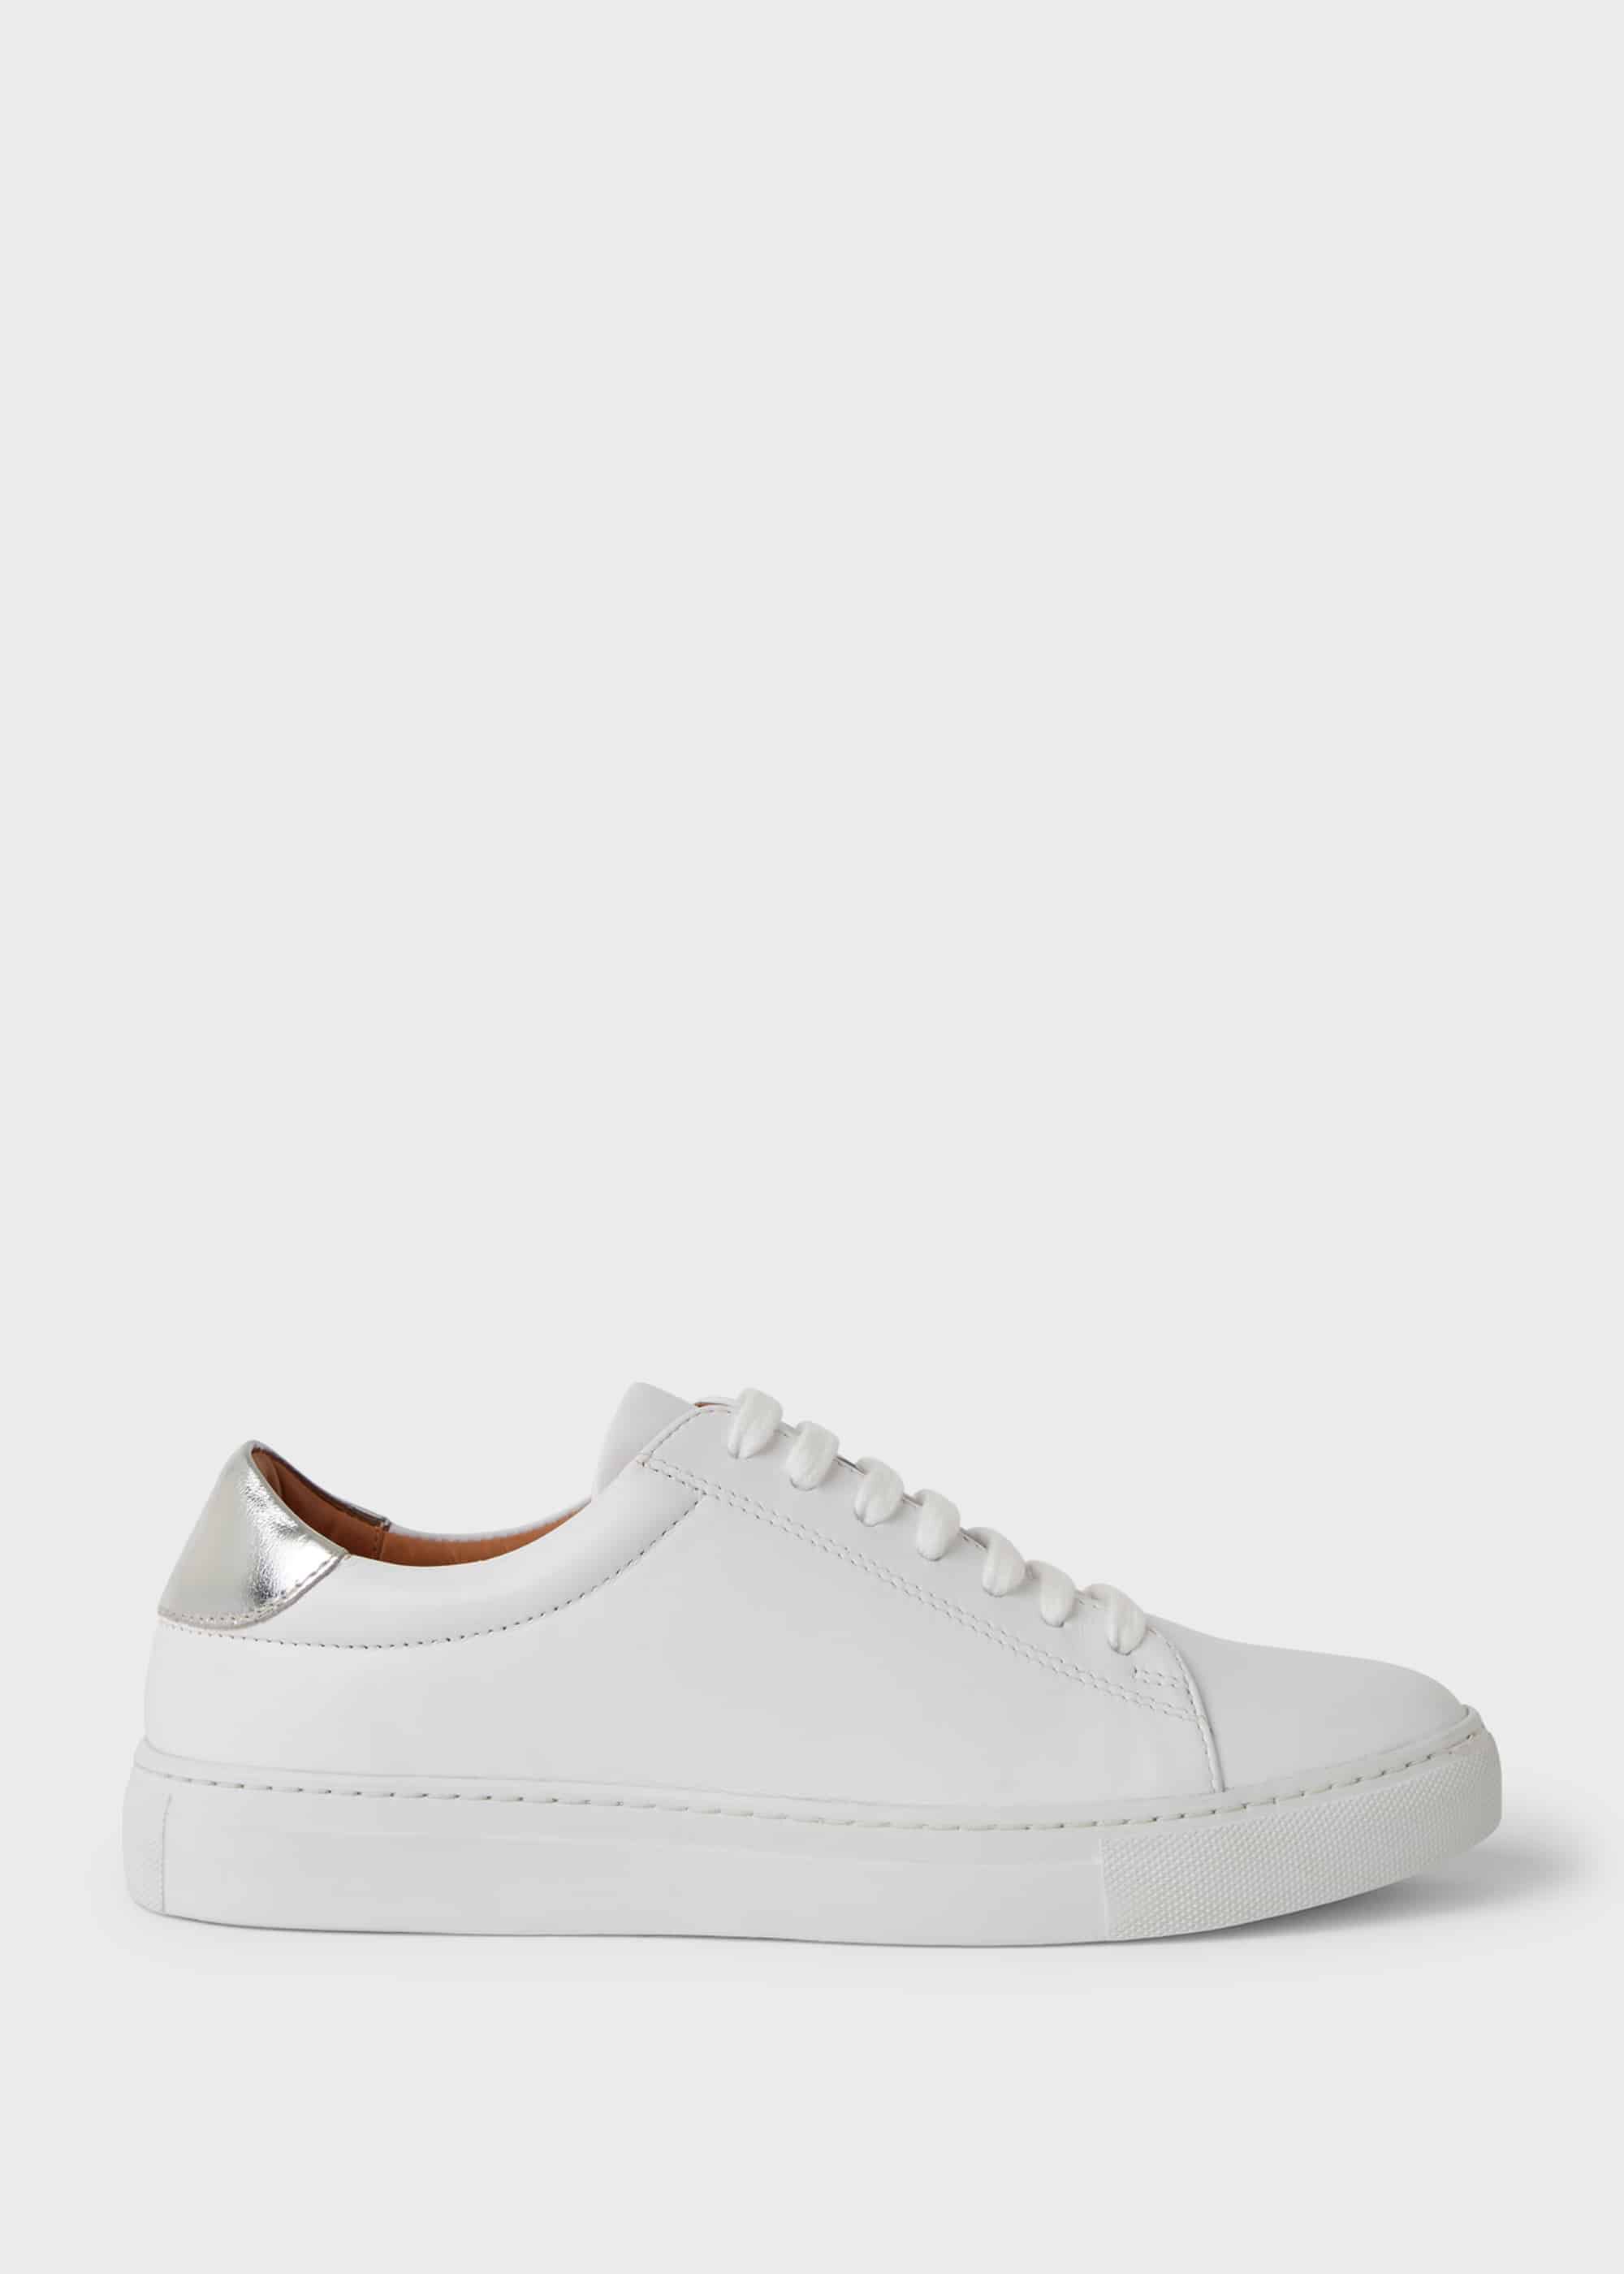 black and white leather trainers